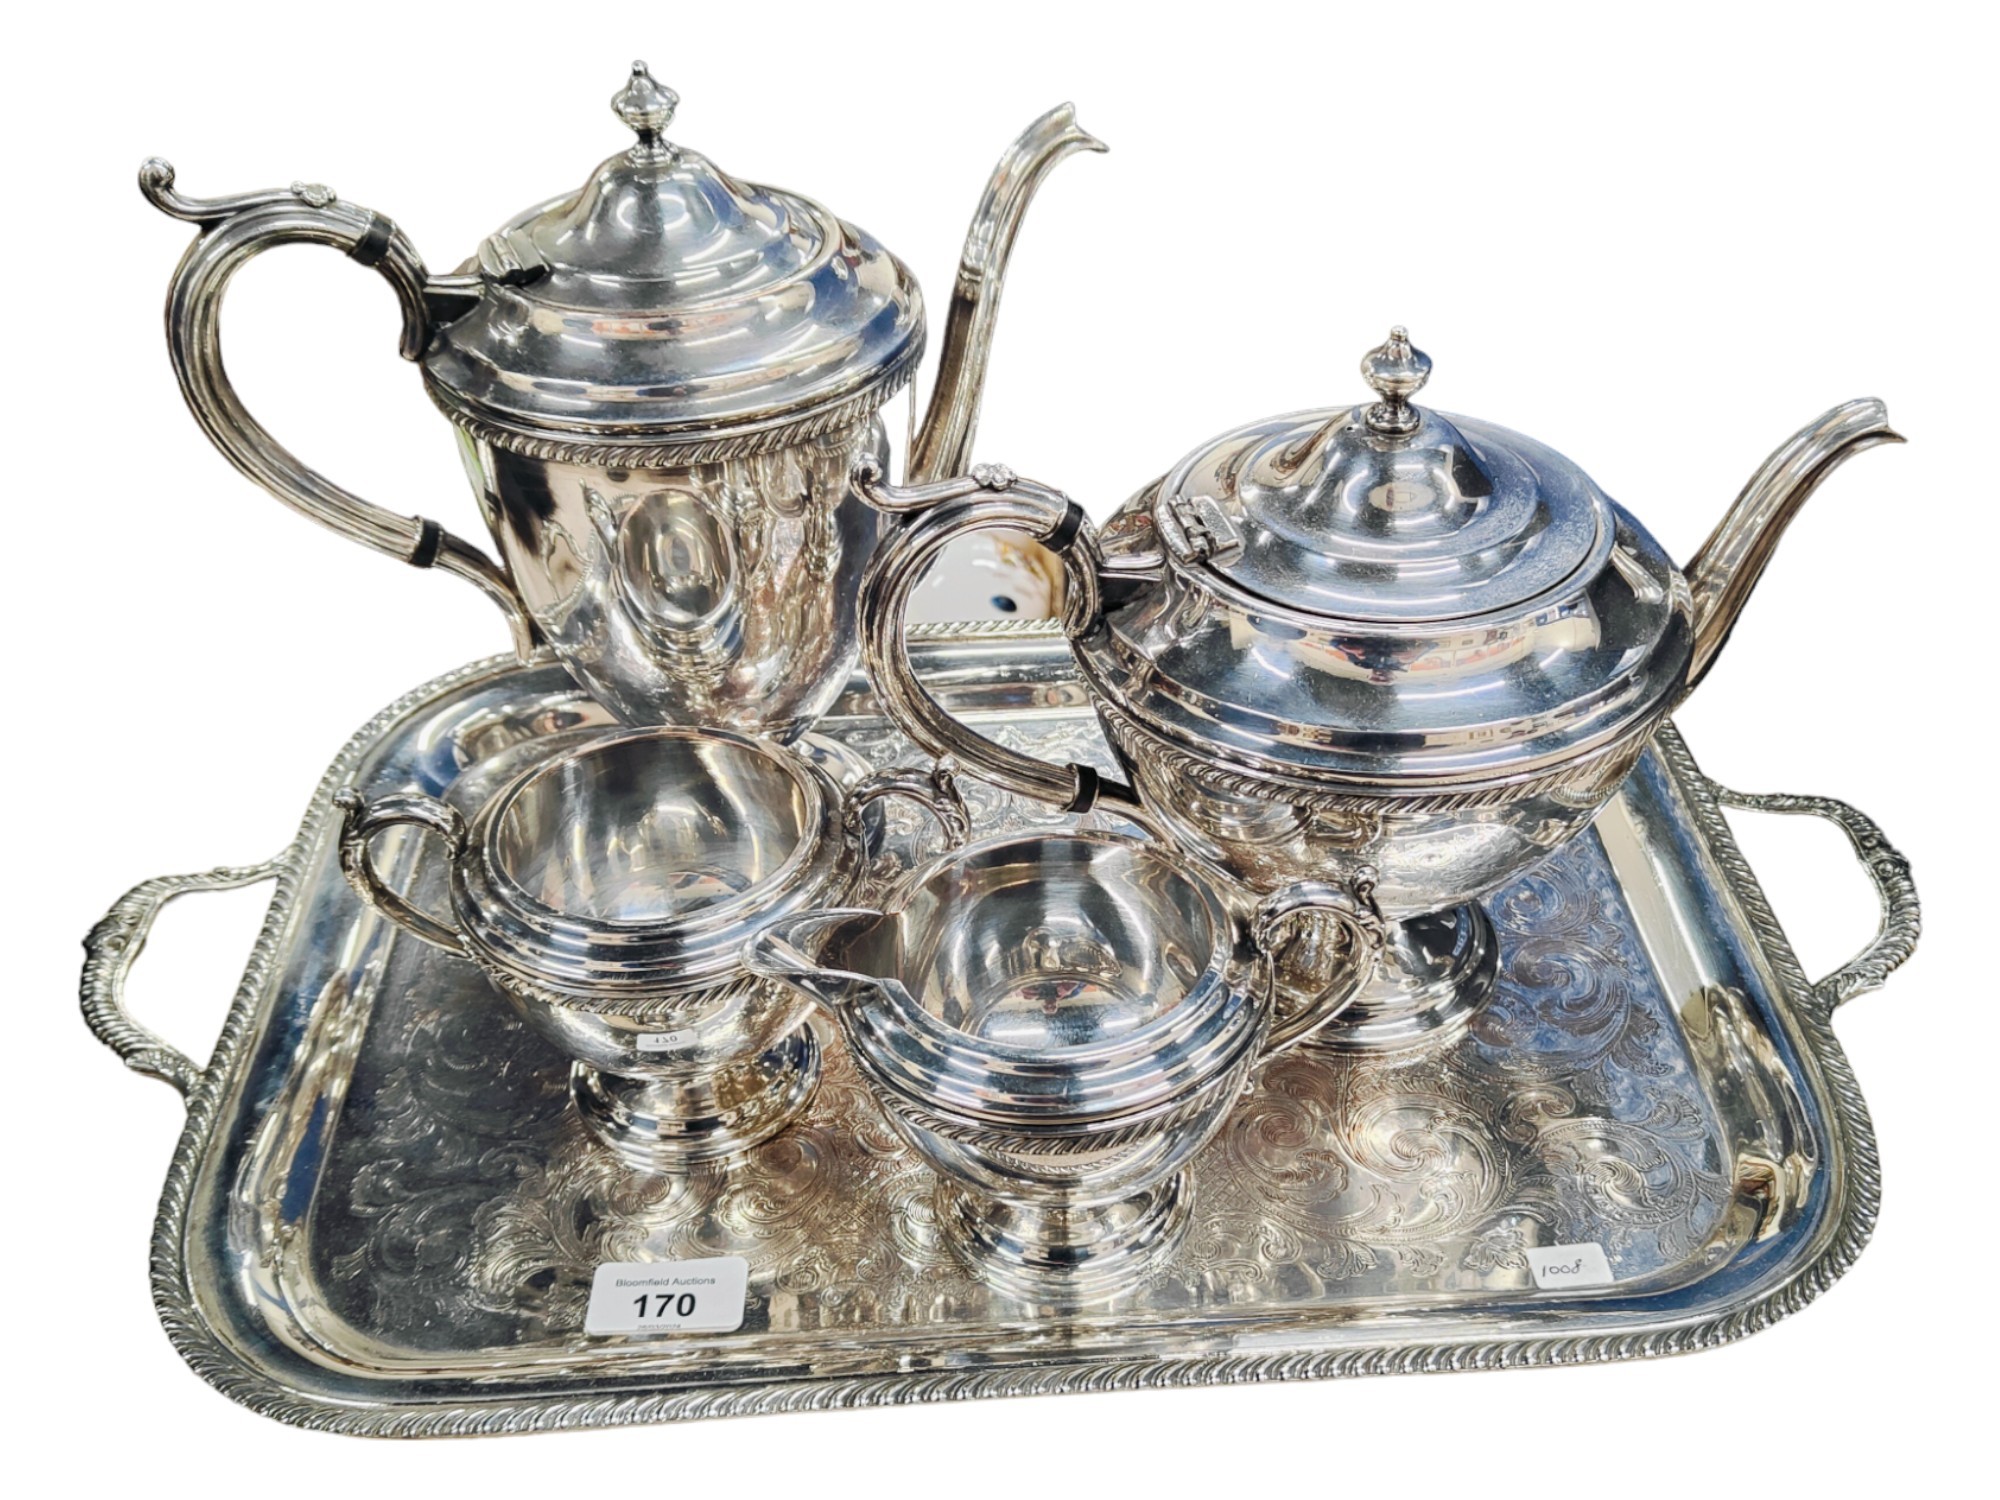 4 PIECE SILVER PLATE TEA/COFFEE SERVICE WITH SILVER PLATE TRAY